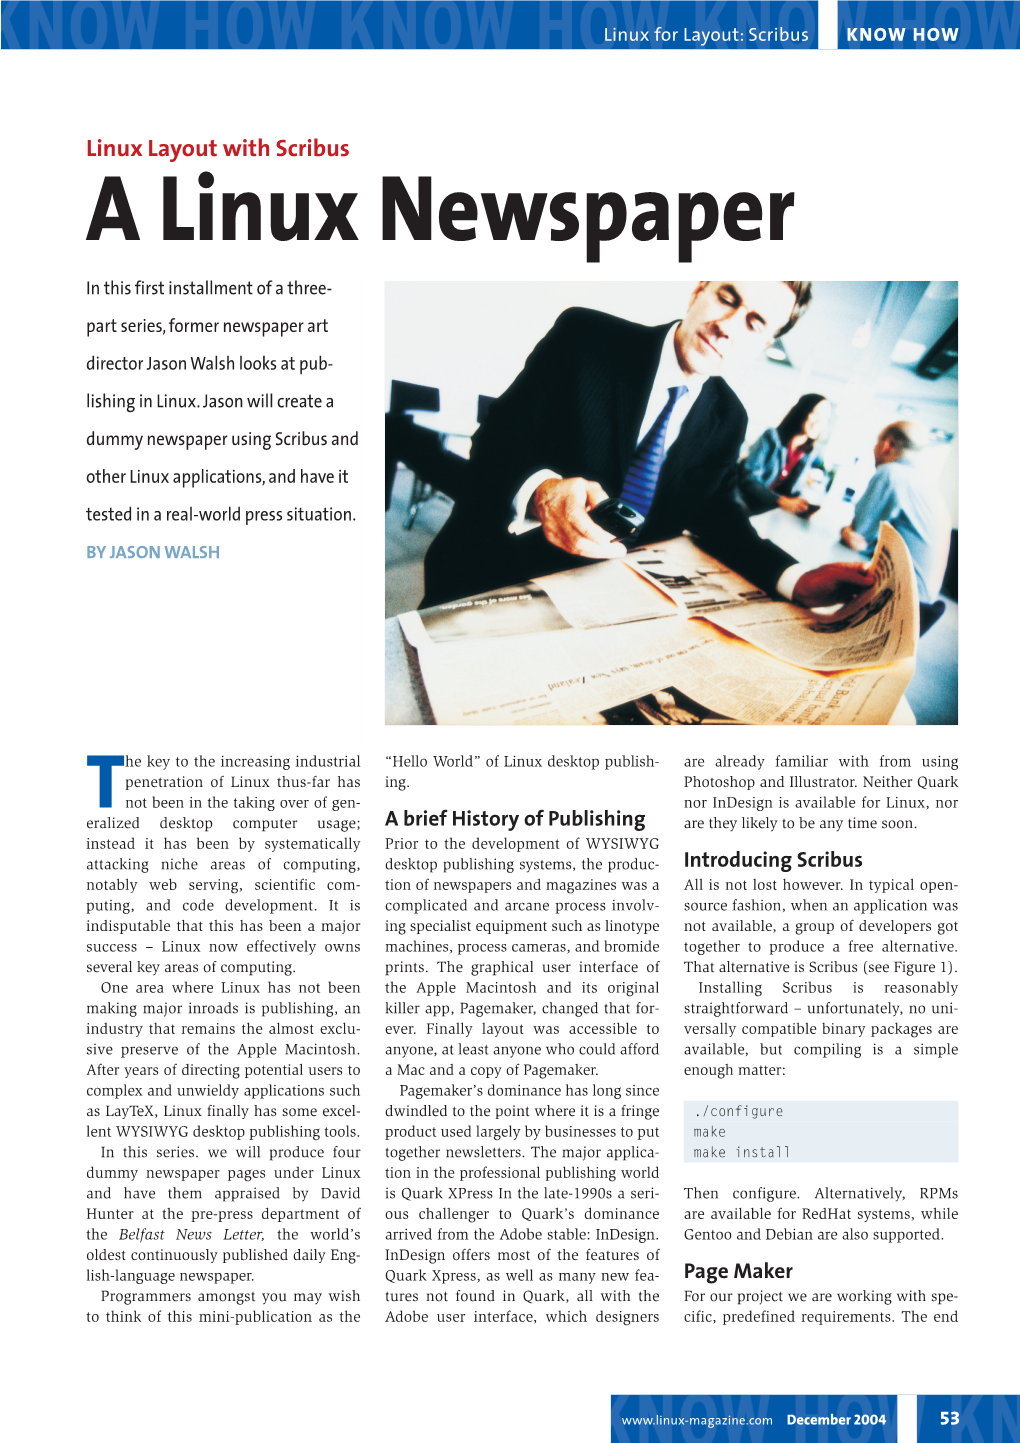 A Linux Newspaper in This First Installment of a Three- Part Series, Former Newspaper Art Director Jason Walsh Looks at Pub- Lishing in Linux